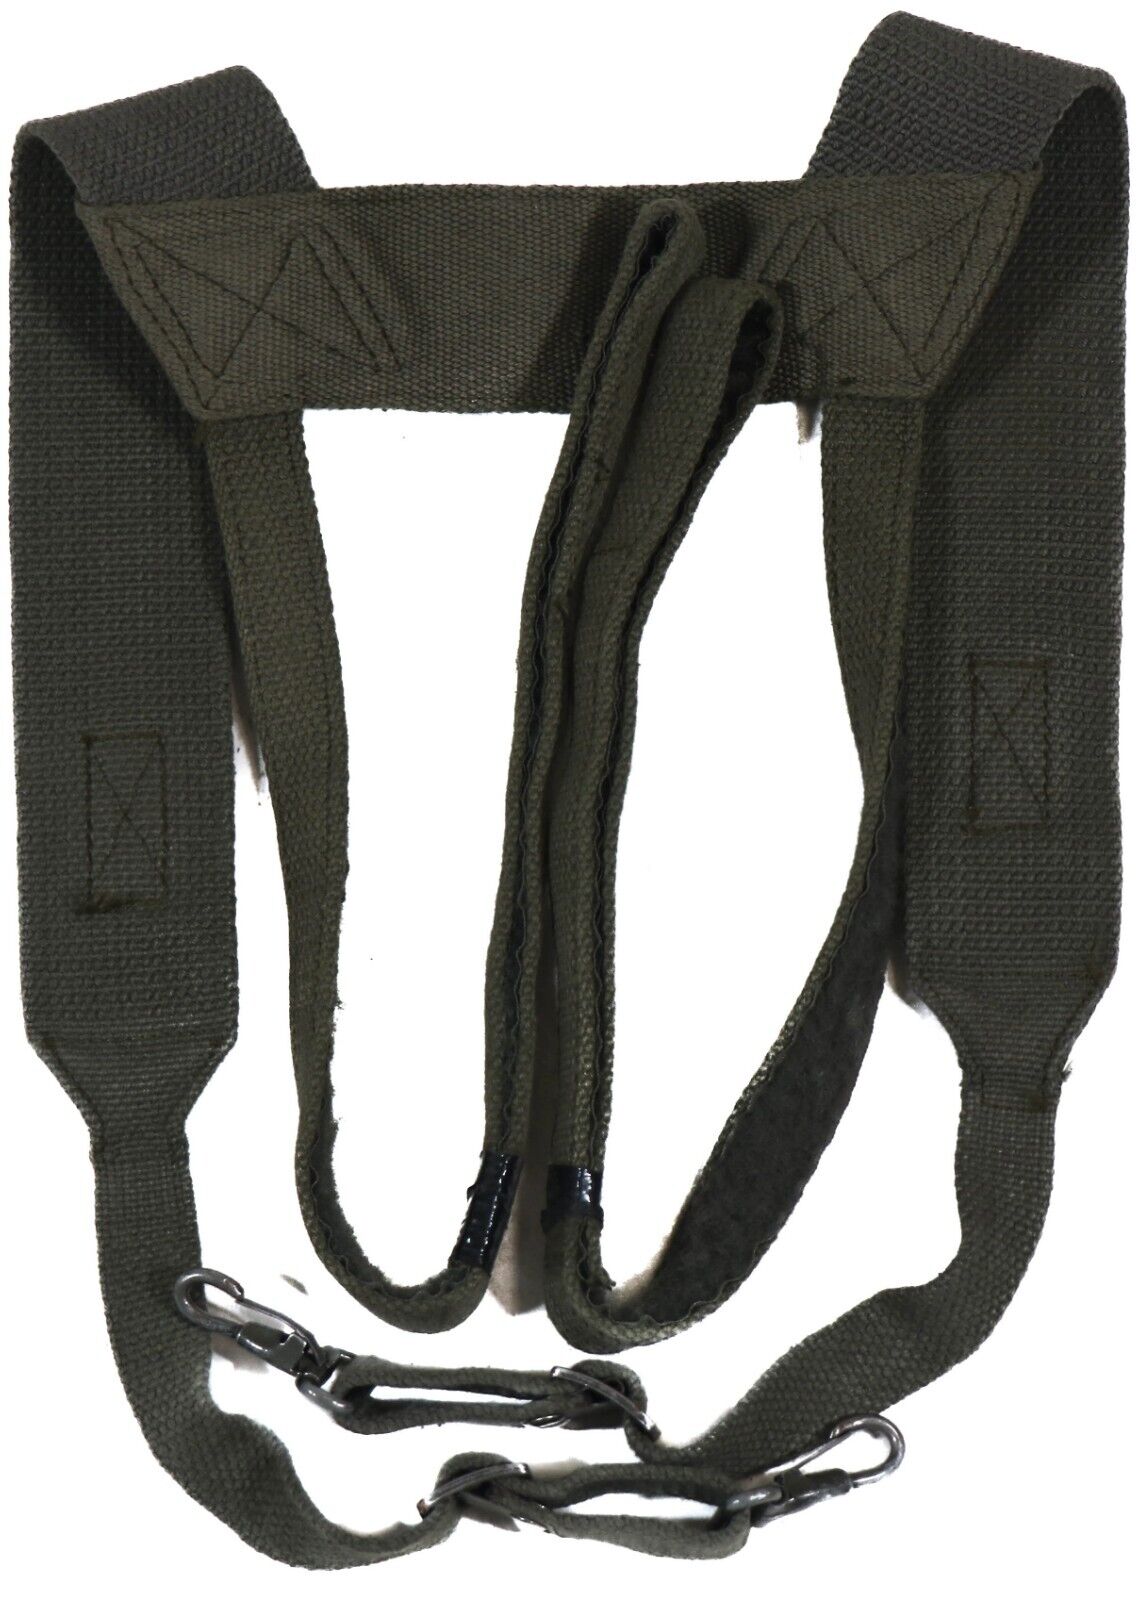 Authentic French FAMAS Combat Suspenders Field Harness OD Green Army Military